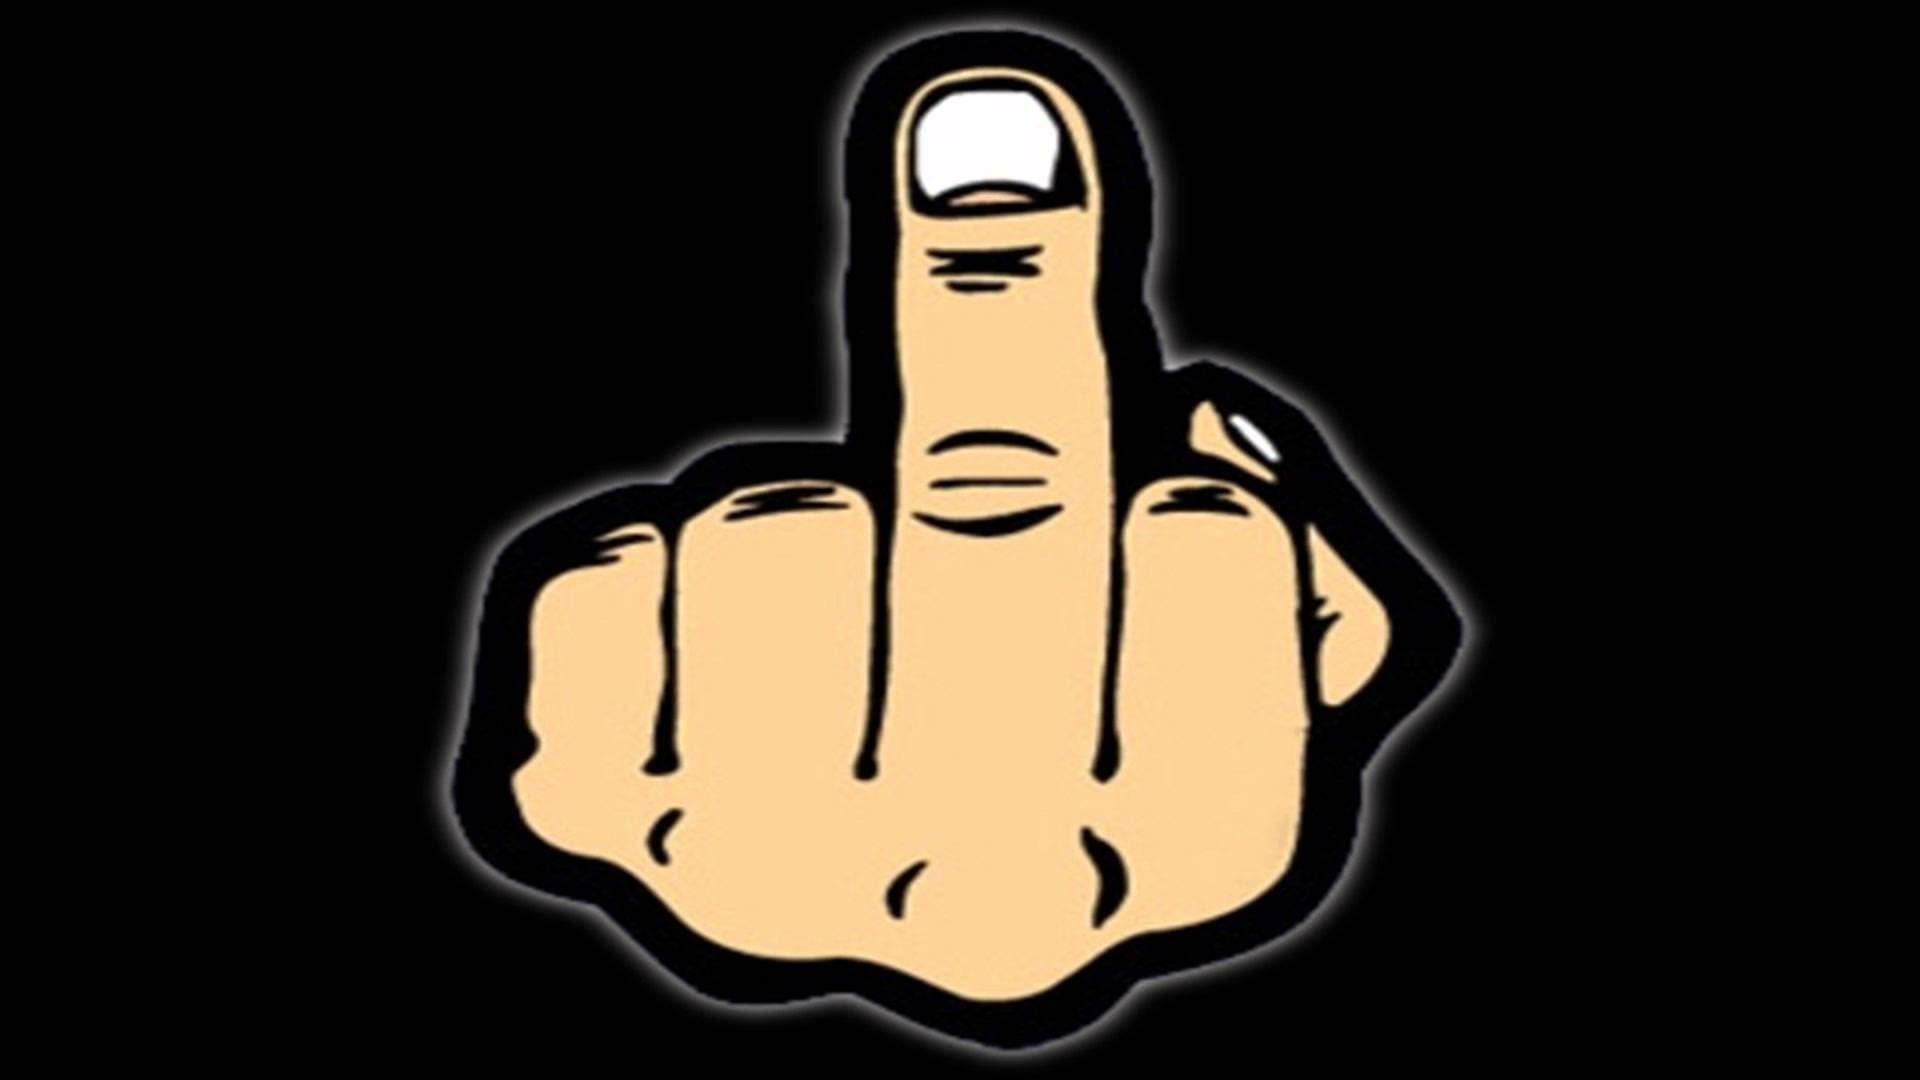 Download Middle Finger wallpapers to your cell phone.